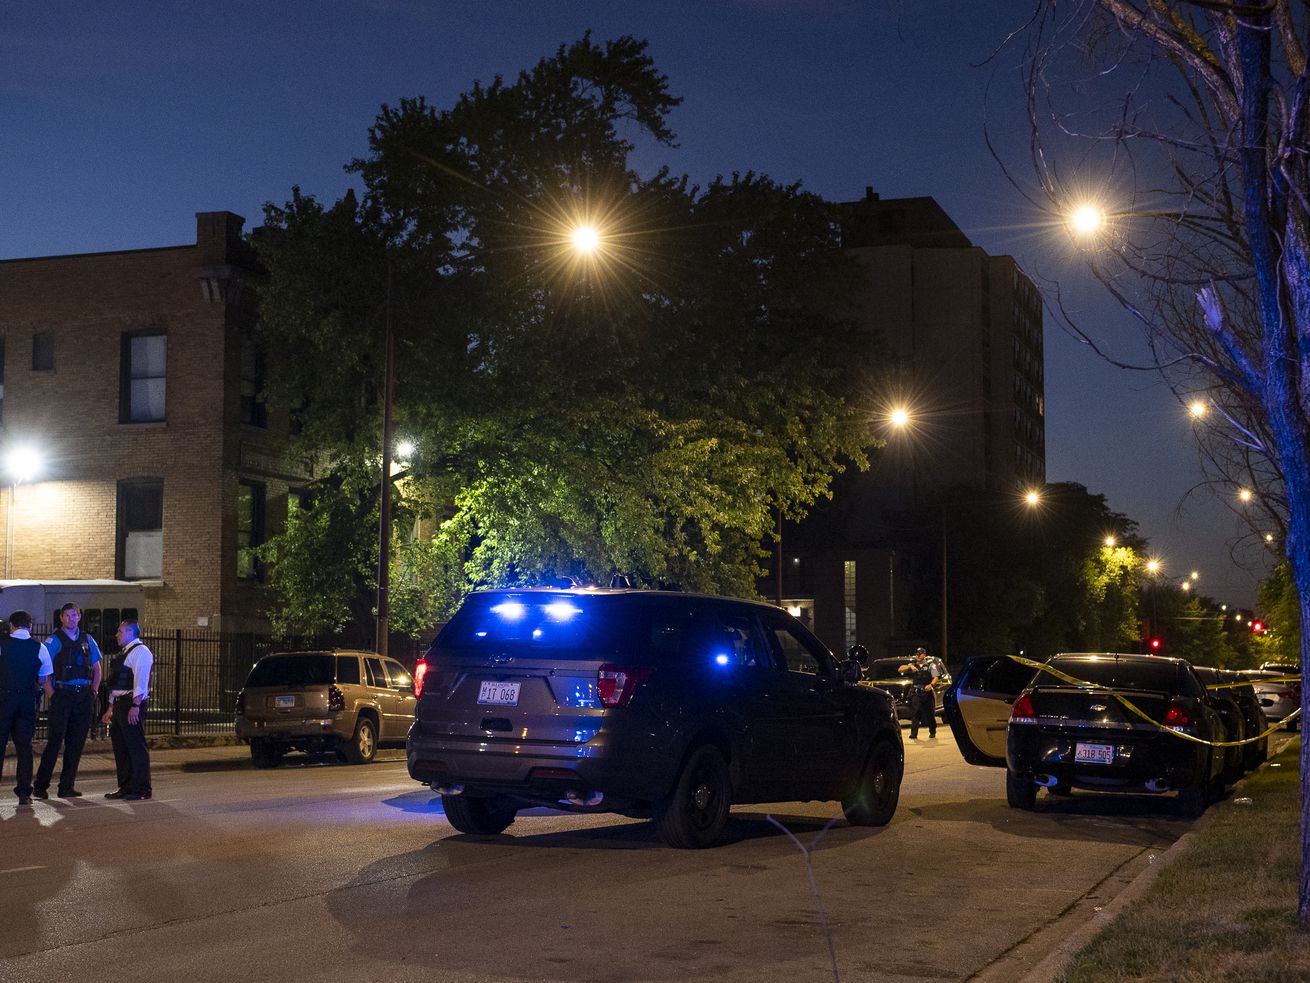 Chicago police work the scene where a vehicle struck and critically wounded a Chicago Police Officer at in the 6300 block of South Michigan, afterwards it was abandoned in the 6100 block of South Indiana, in the Washington Park neighborhood, Friday, Aug. 13, 2021.